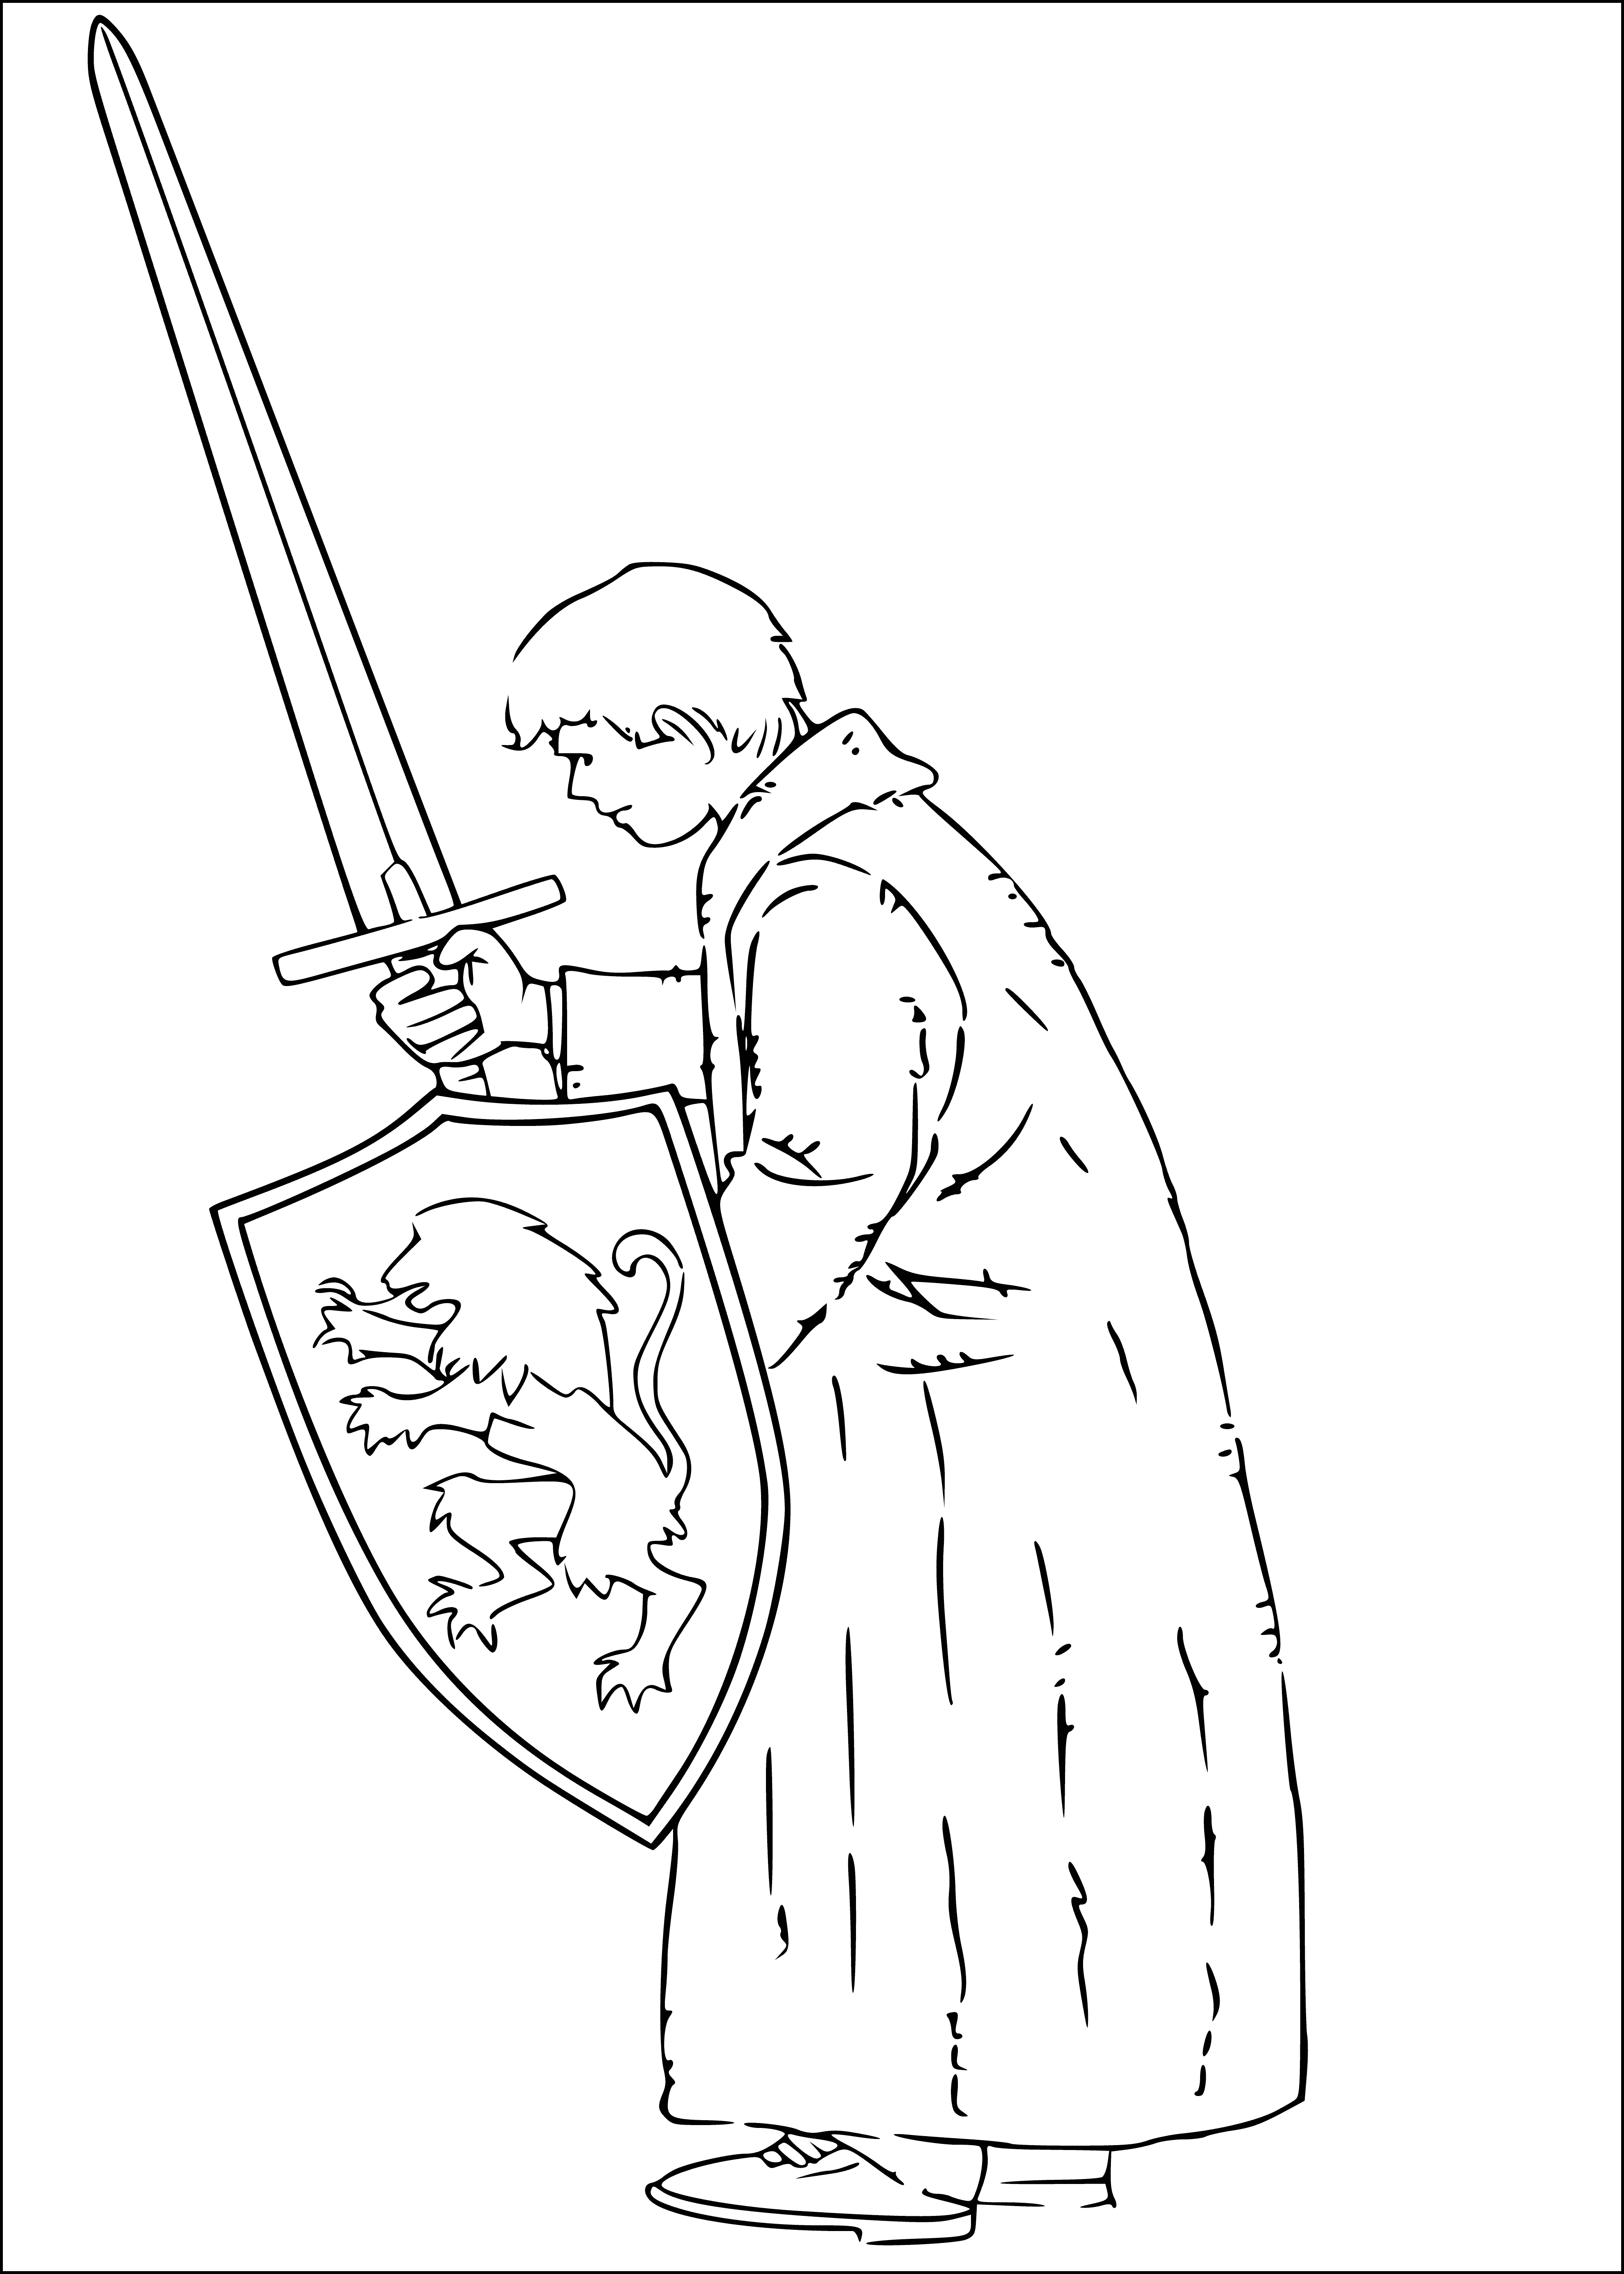 Peter got a sword coloring page